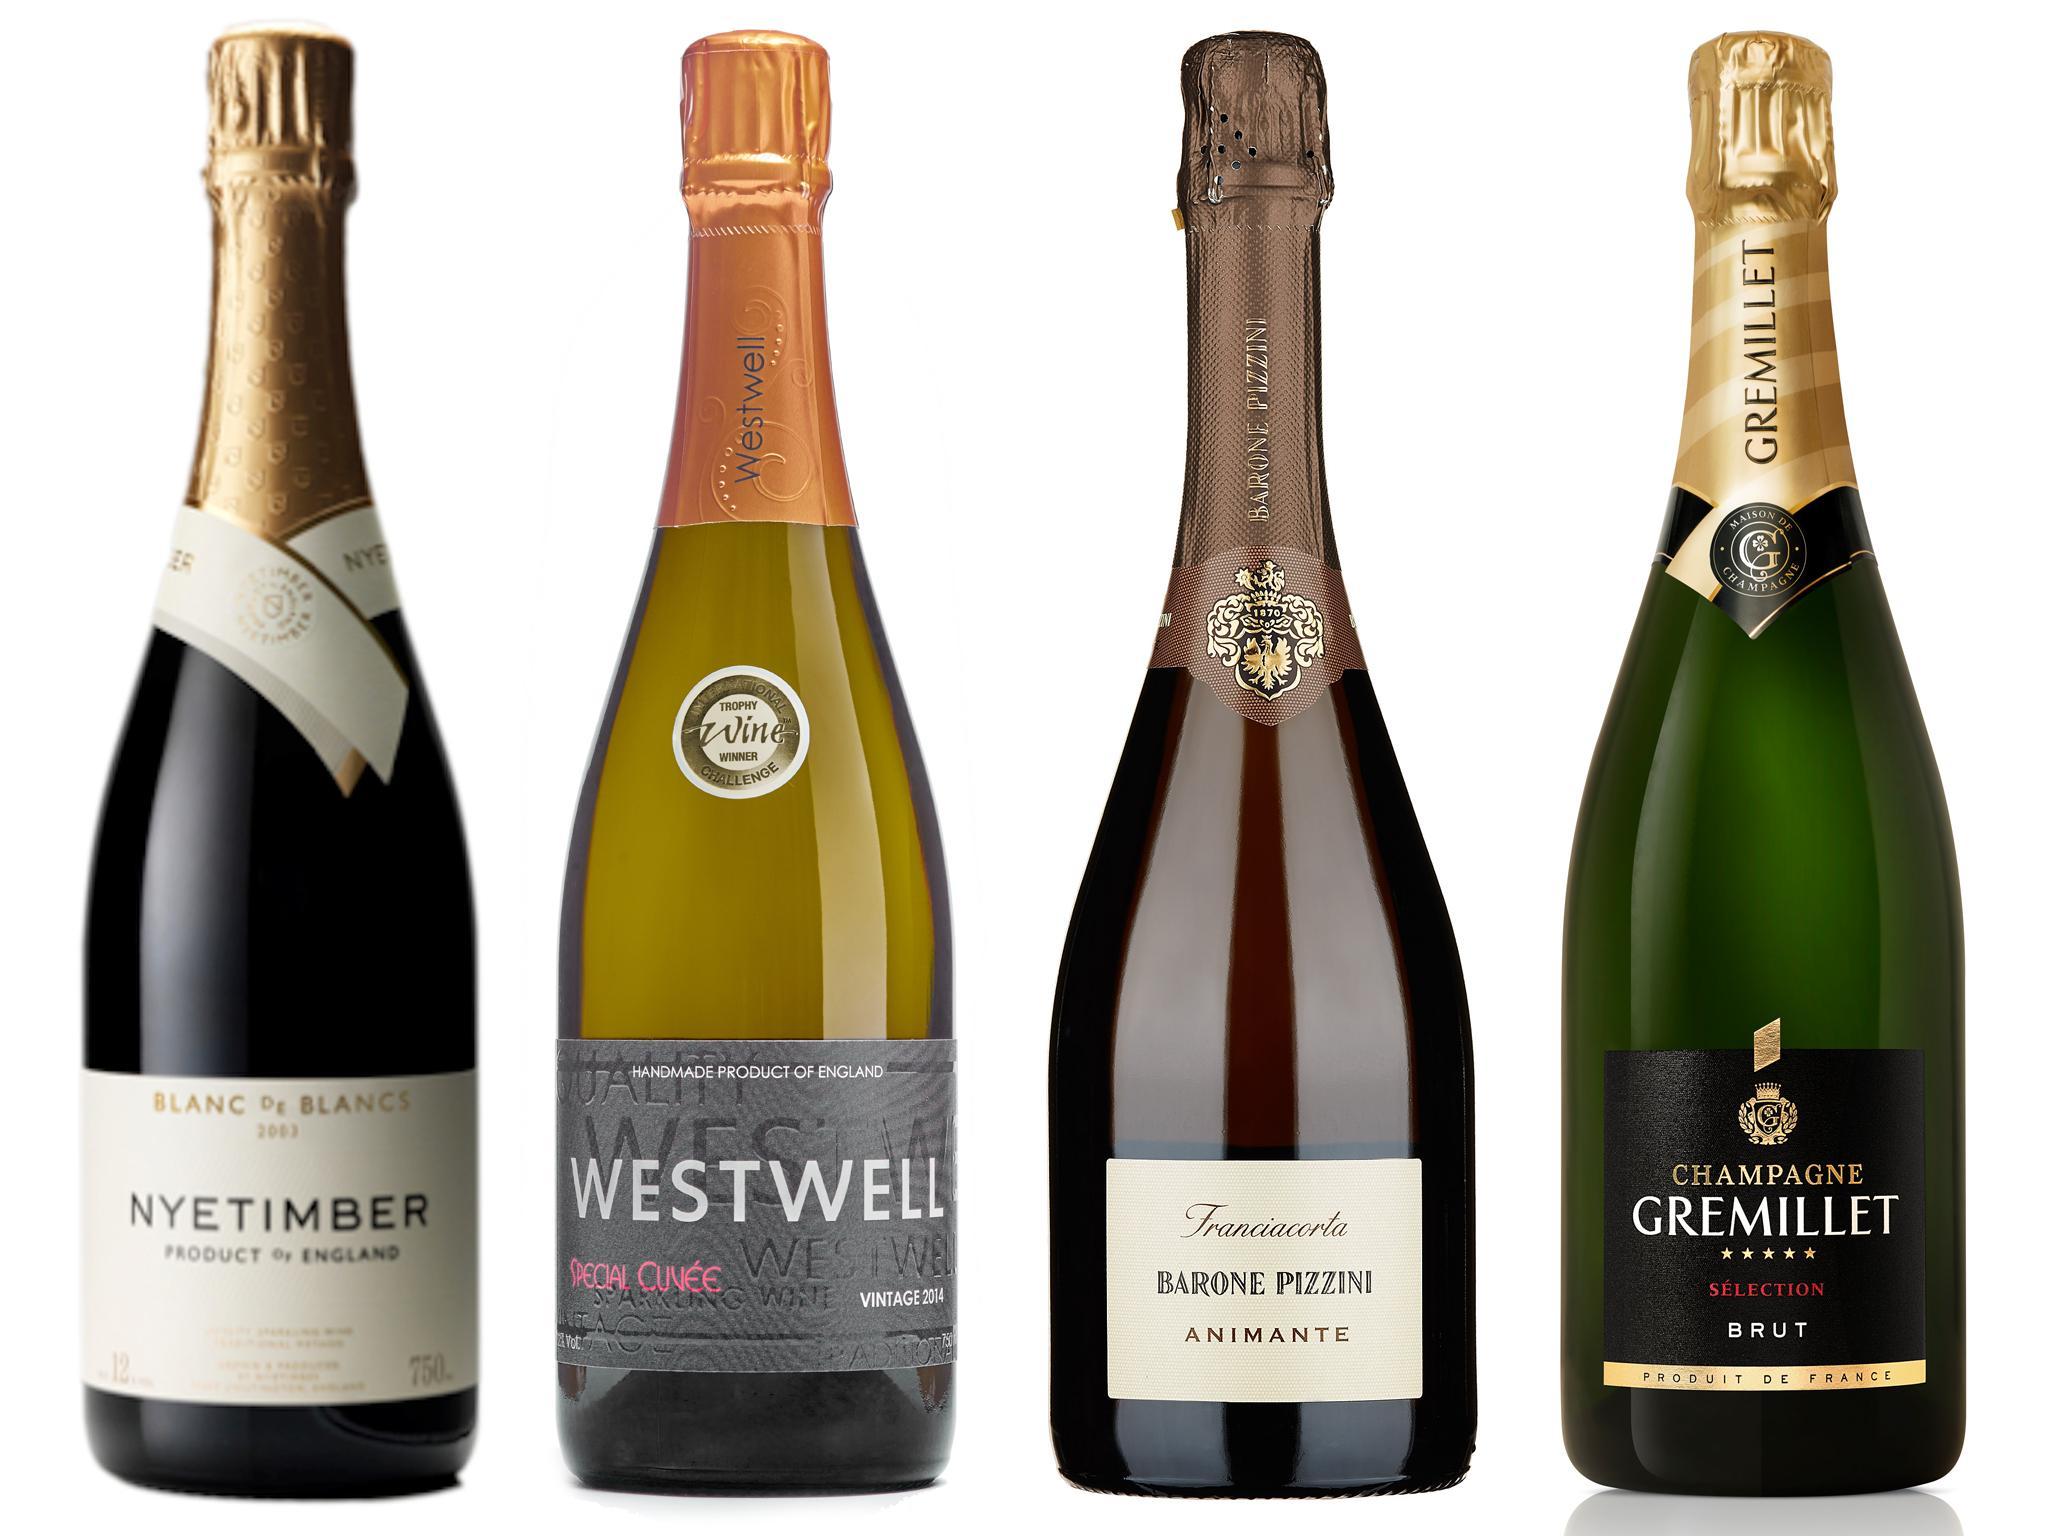 Our choices even include some top homegrown winemakers Nyetimber and Westwell